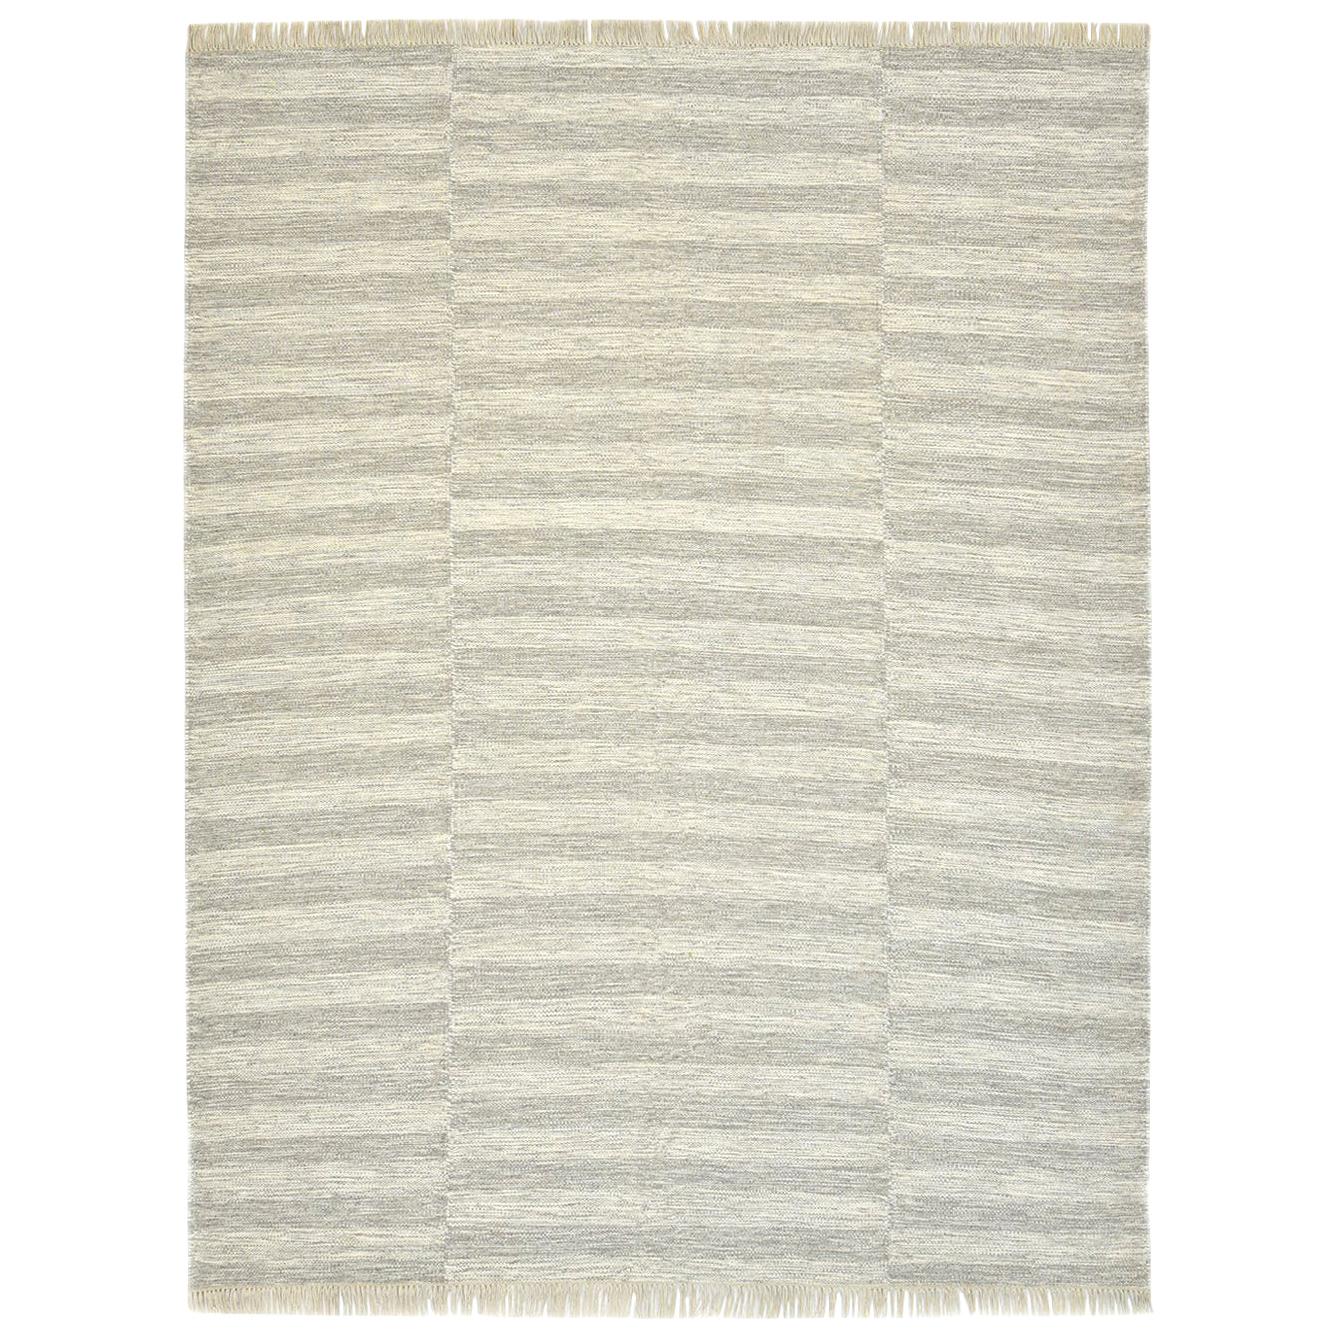 Indian Made Hand Woven Contemporary Flatweave Area Rug For Sale